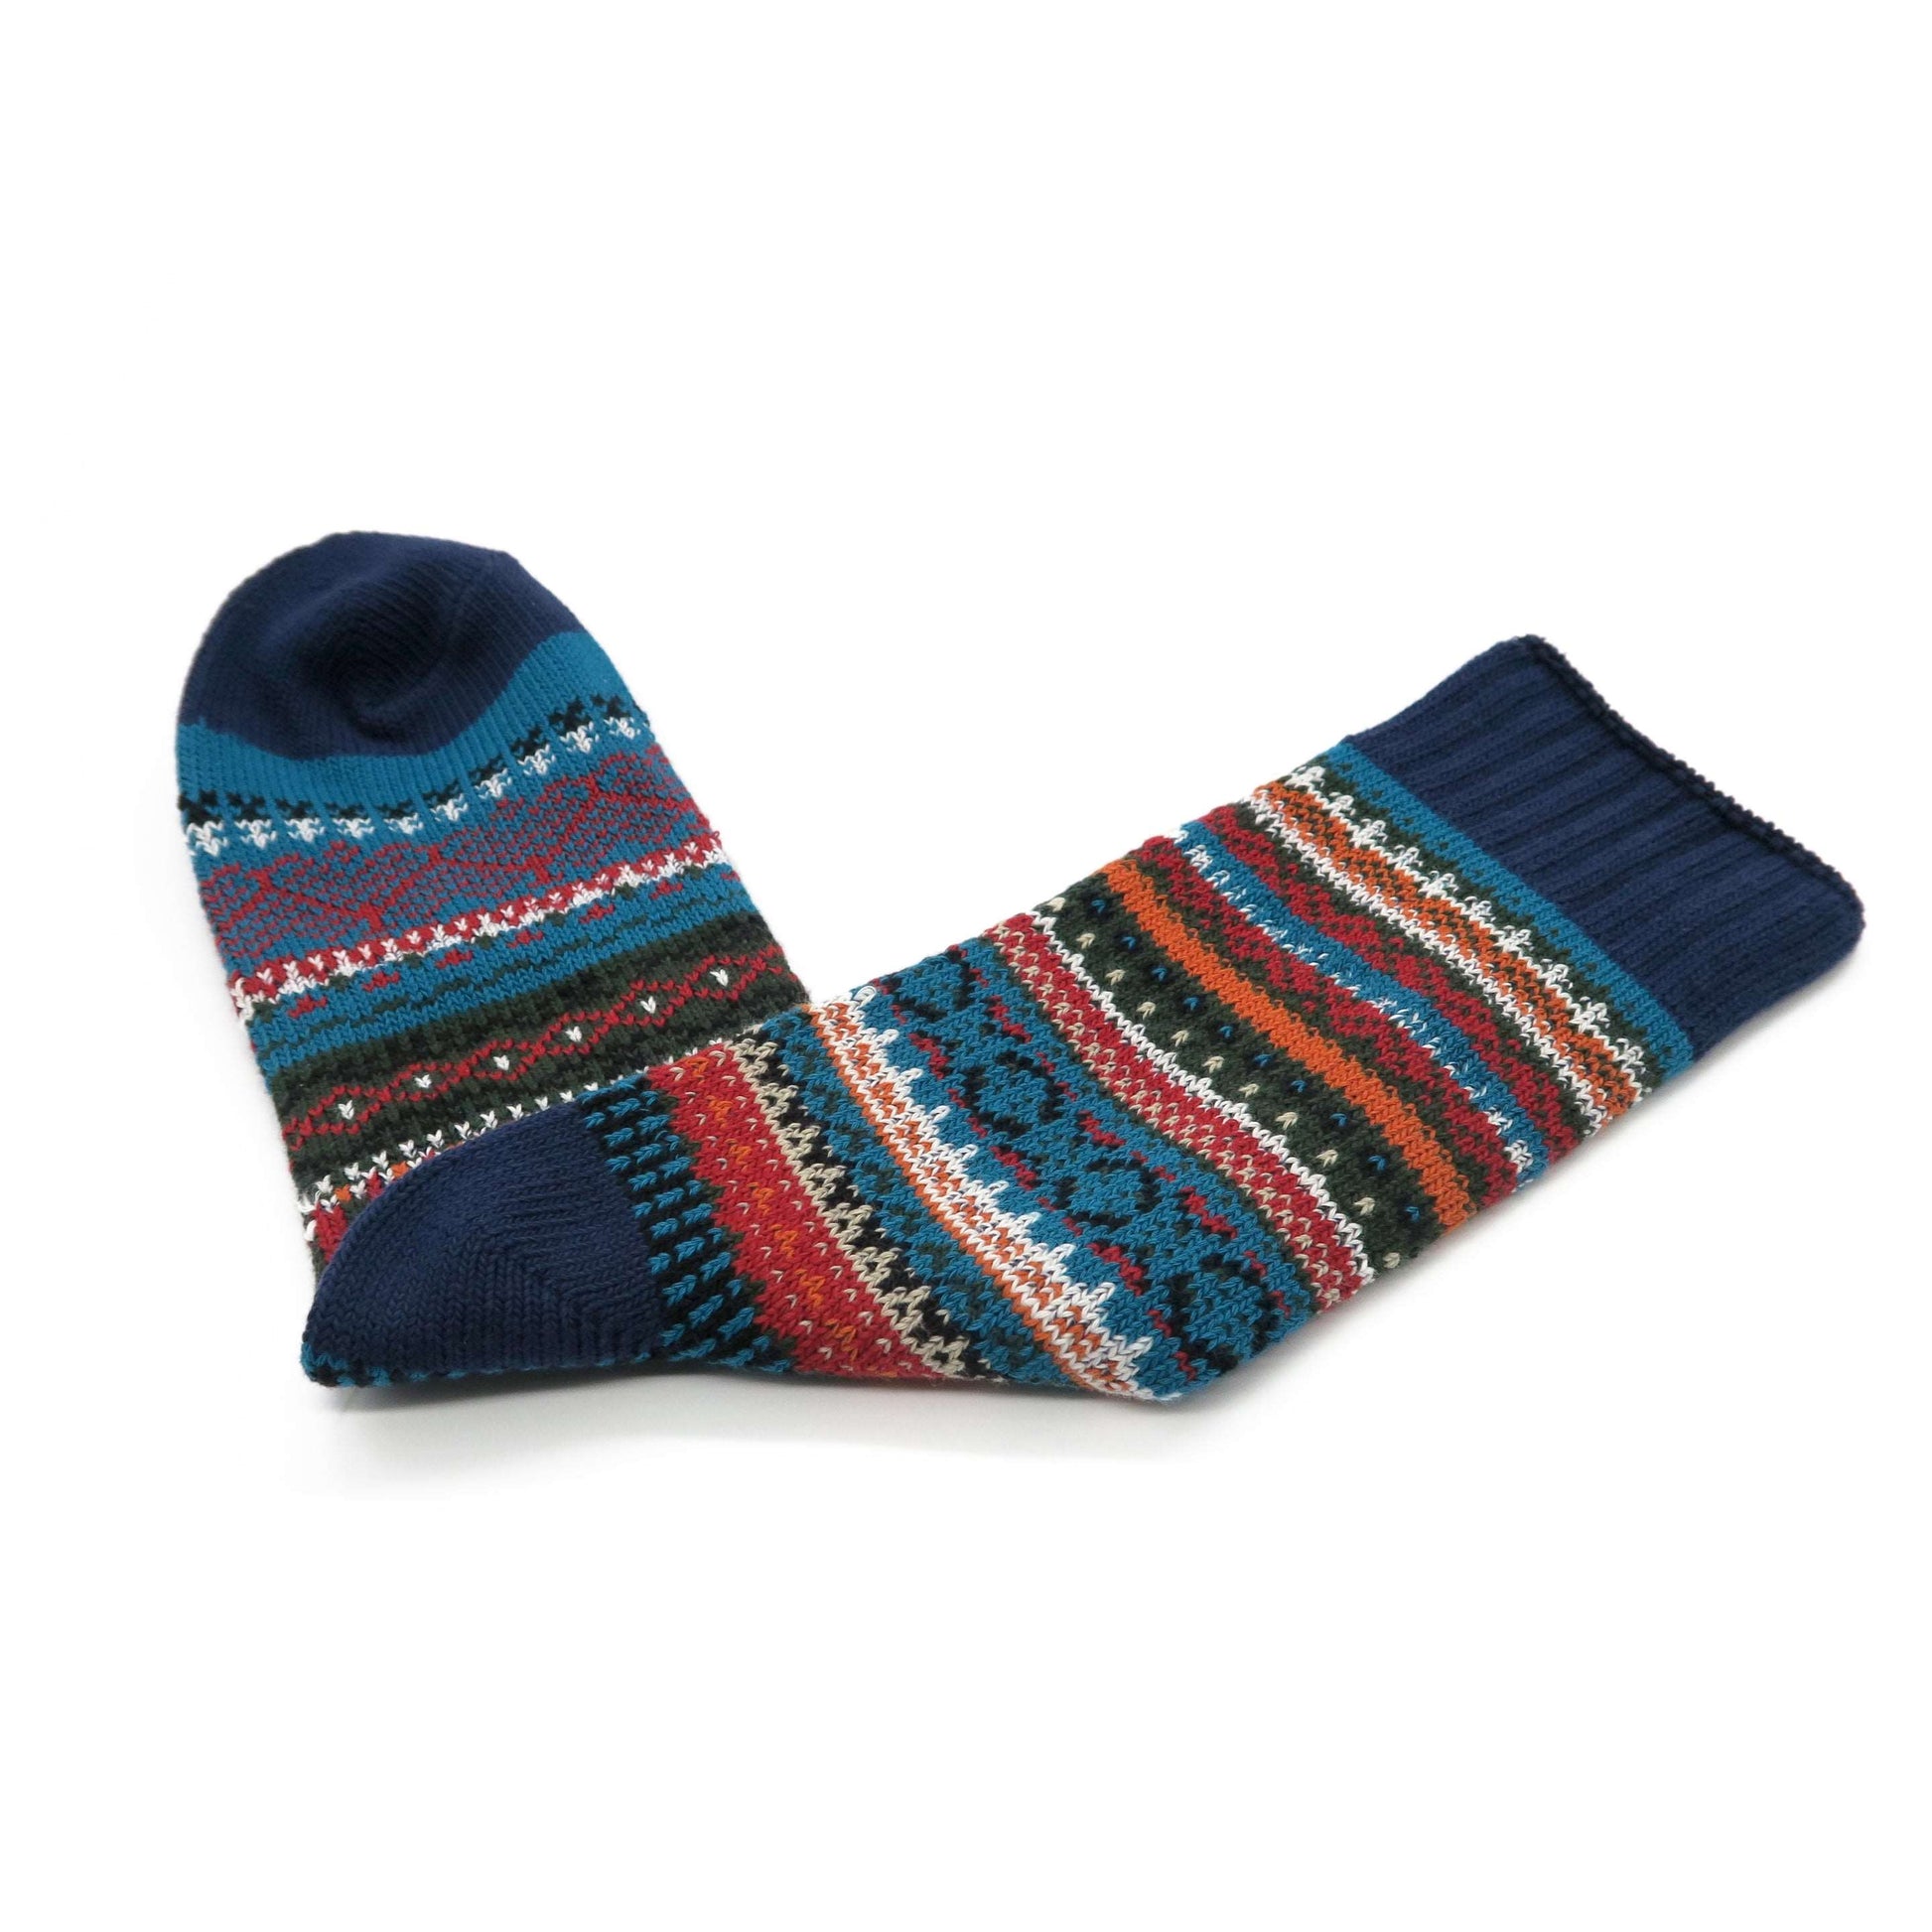 lago socks - navy color with colorful stripe pattern